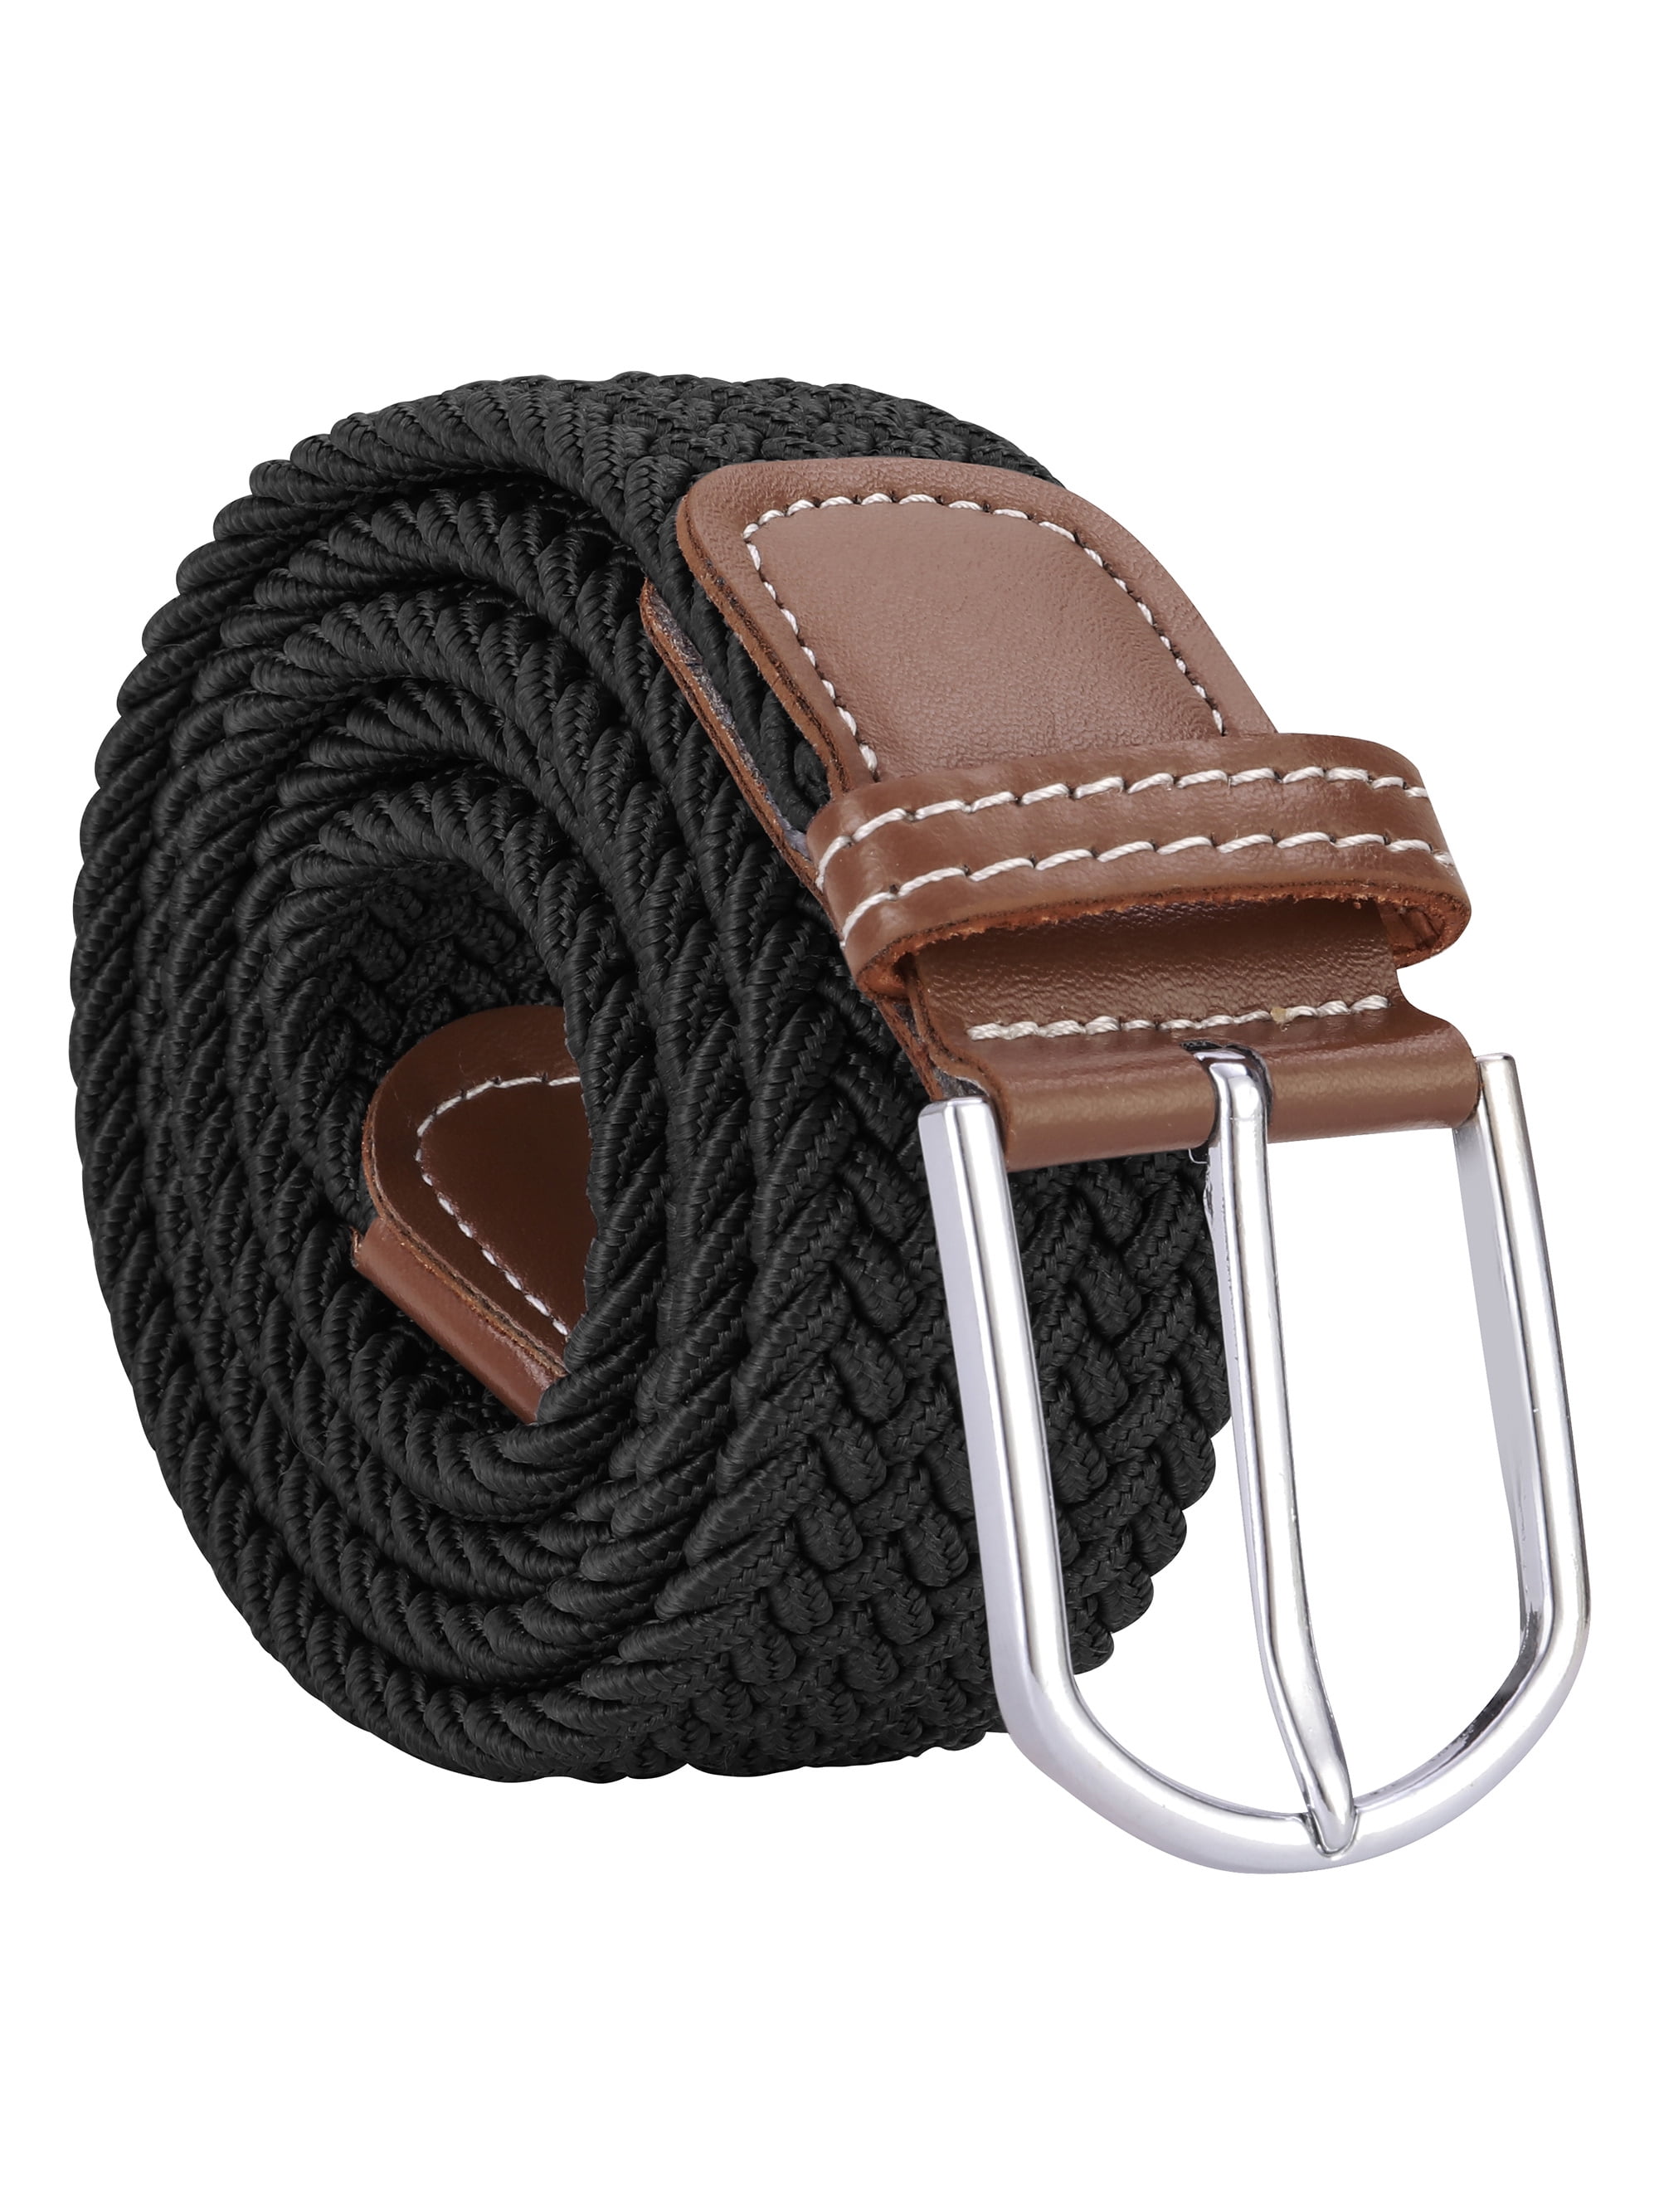 SUOSDEY Mens Braided Leather Belt Cowhide Woven Leather Belt for Casual Jeans Pants with Solid Prong Buckle Christmas Gift